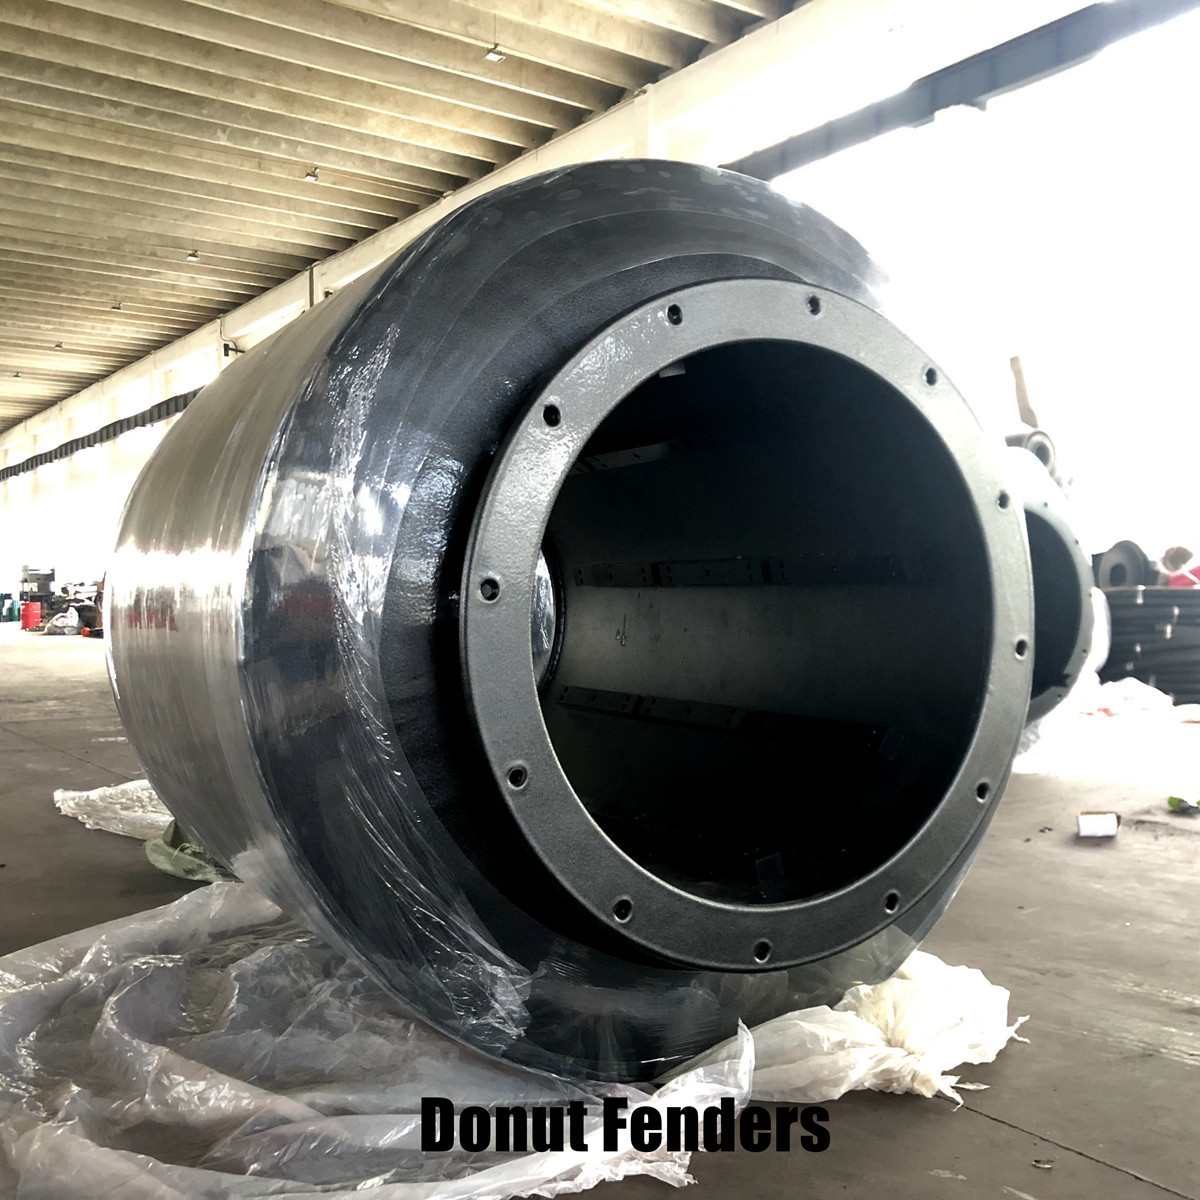 Donut fenders used for lock entrances and turning structures and approach channels